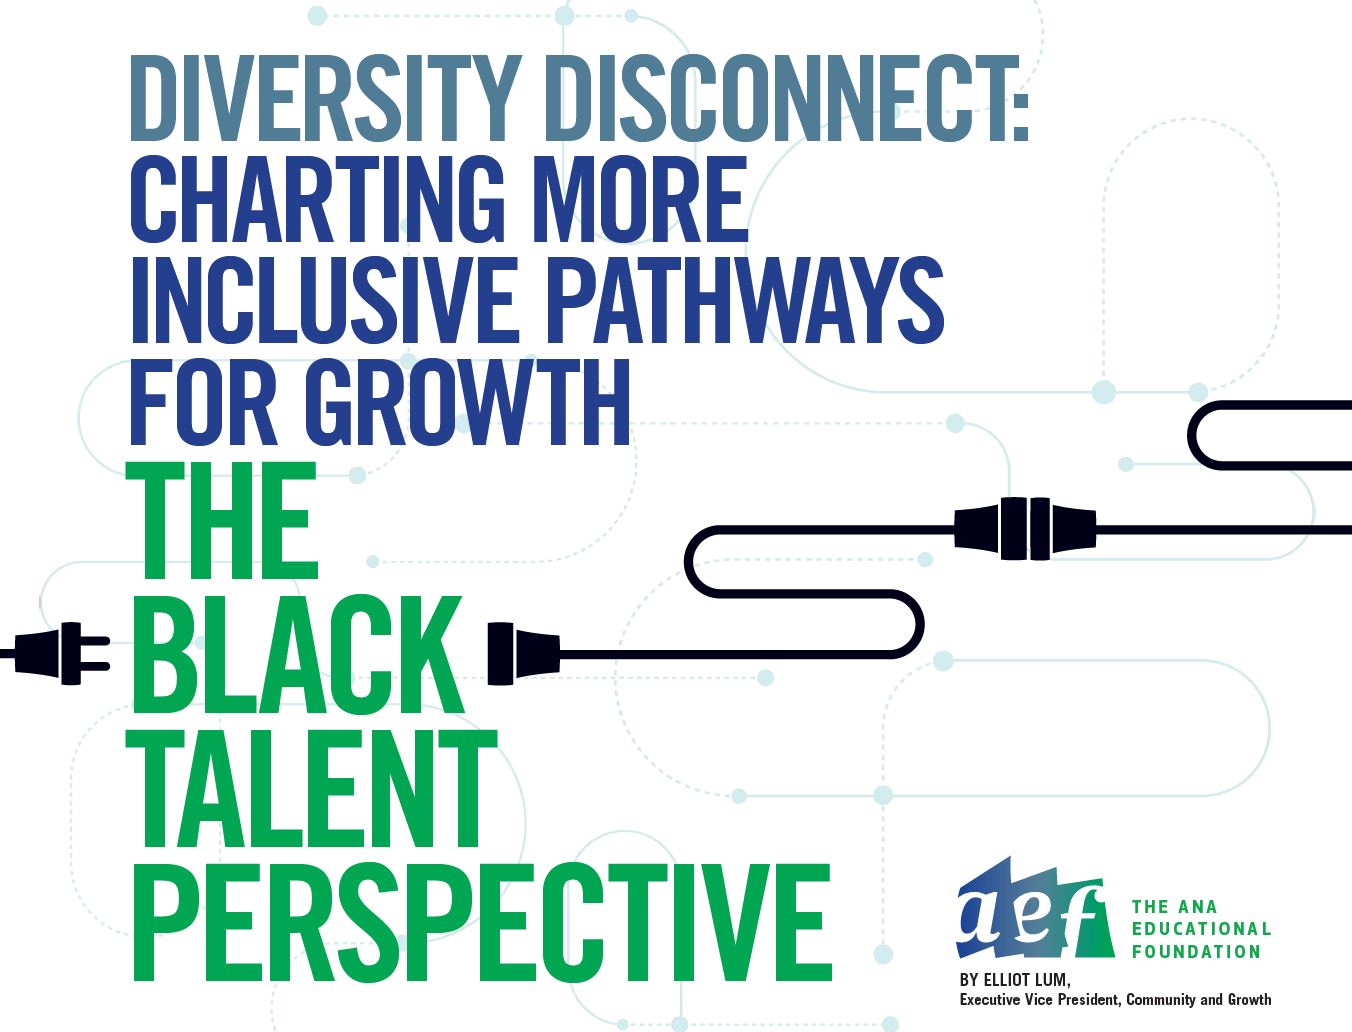 The Black Talent Perspective research study